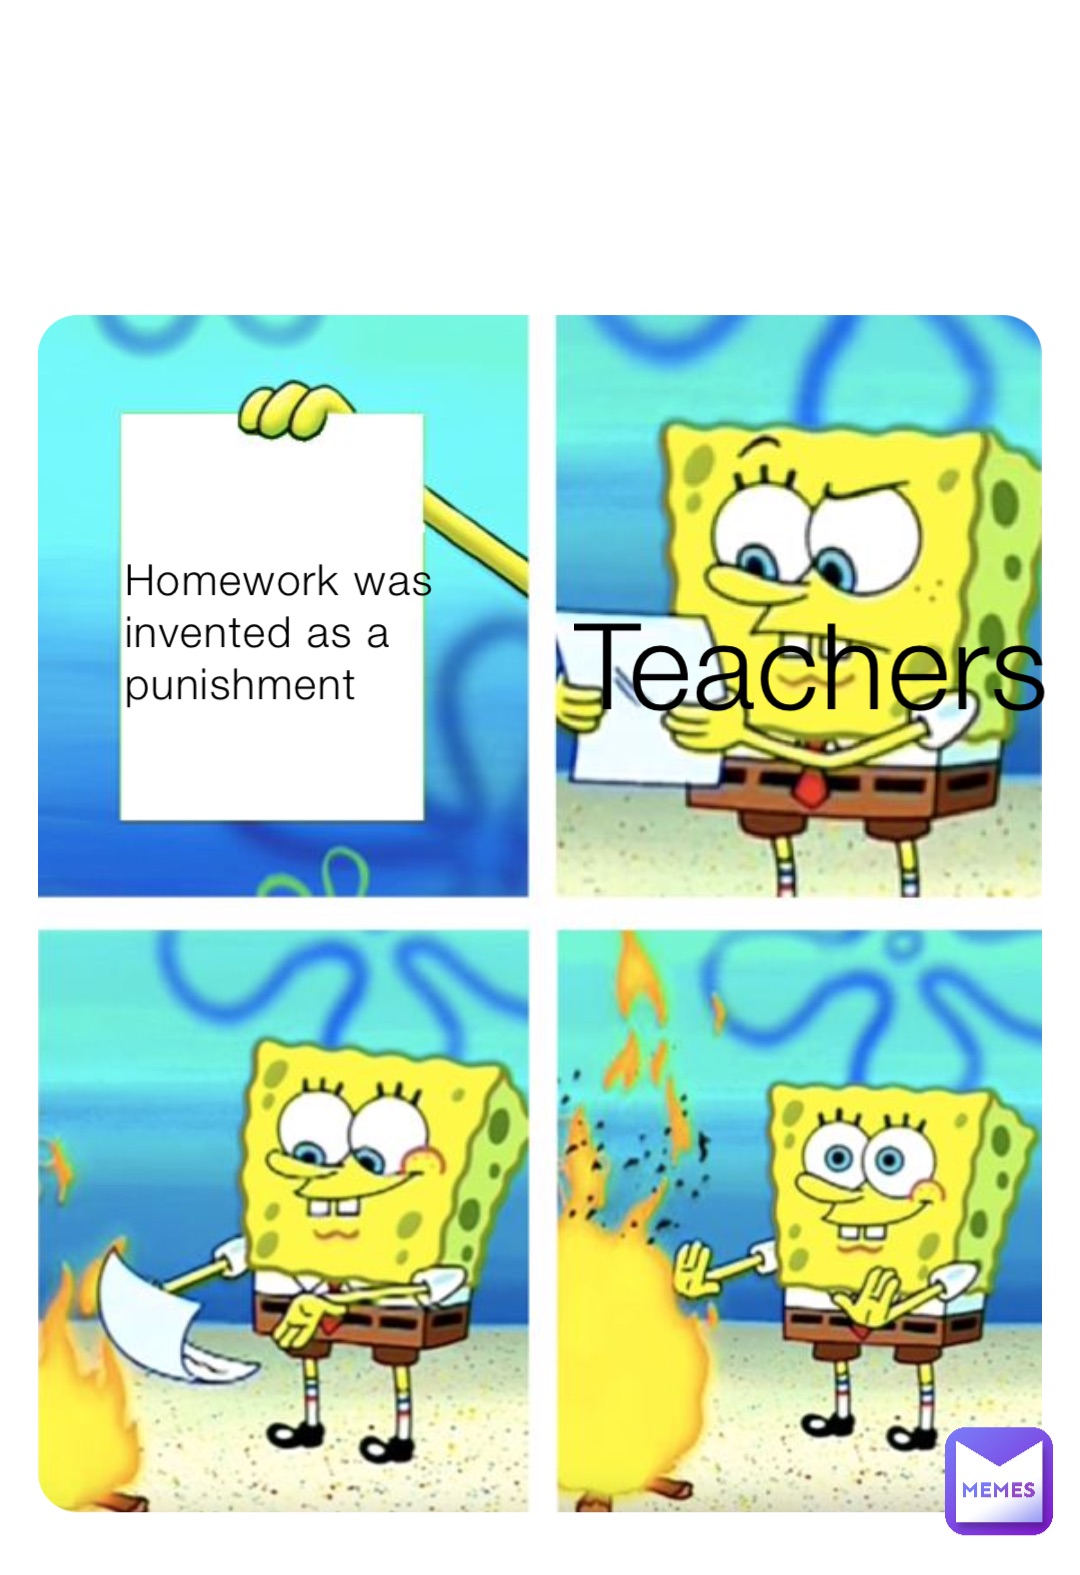 was homework meant to be a punishment